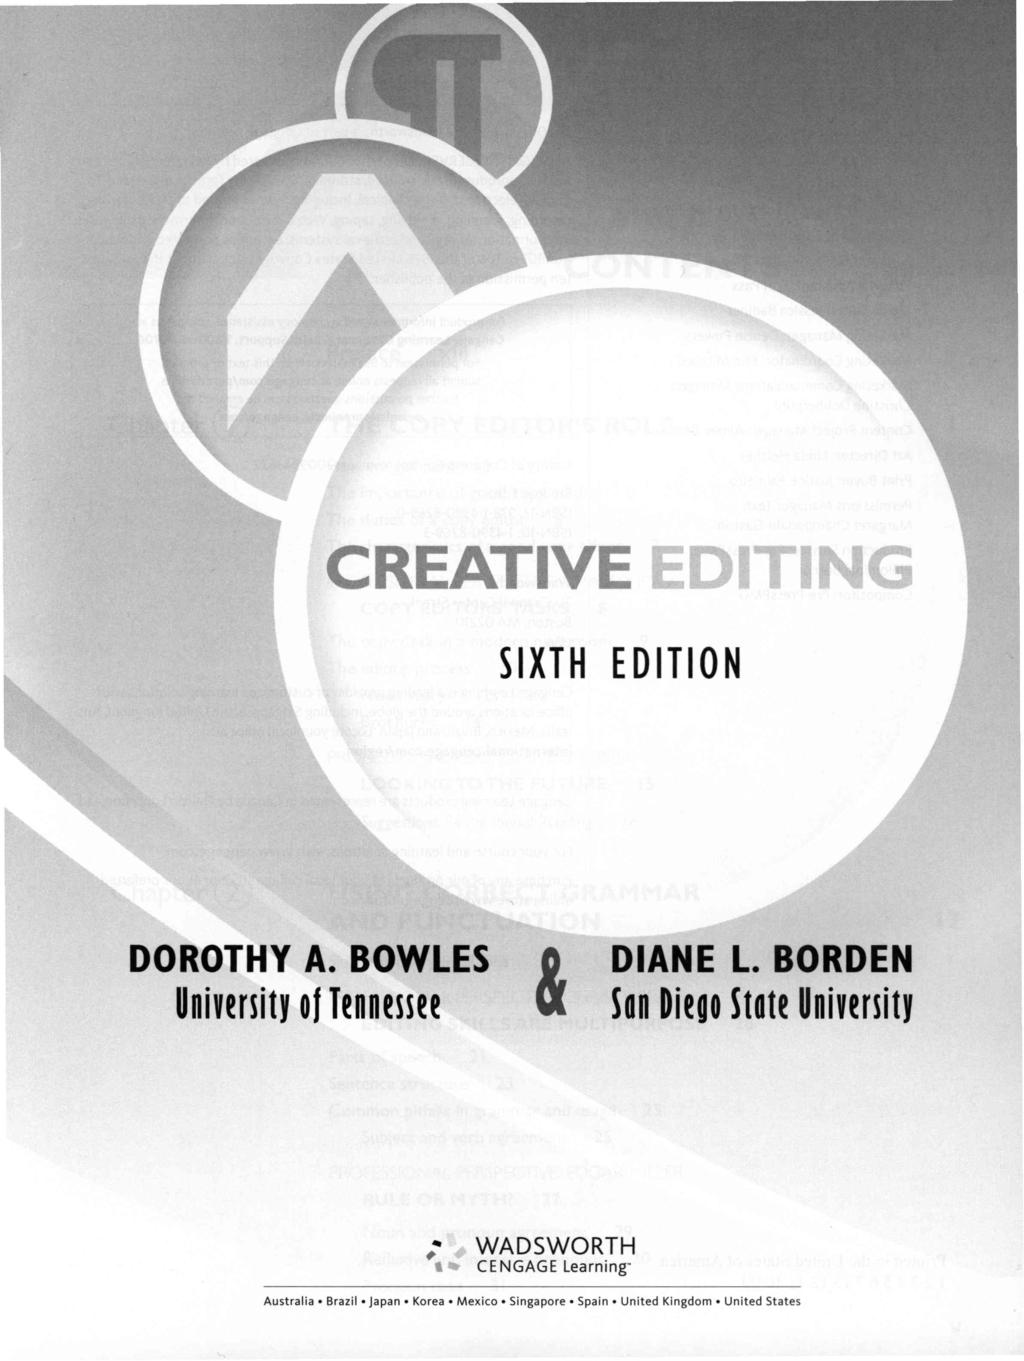 CREATIVE EDITING SIXTH EDITION DOROTHY A. BOWLES University of Tennessee & DIANE L.